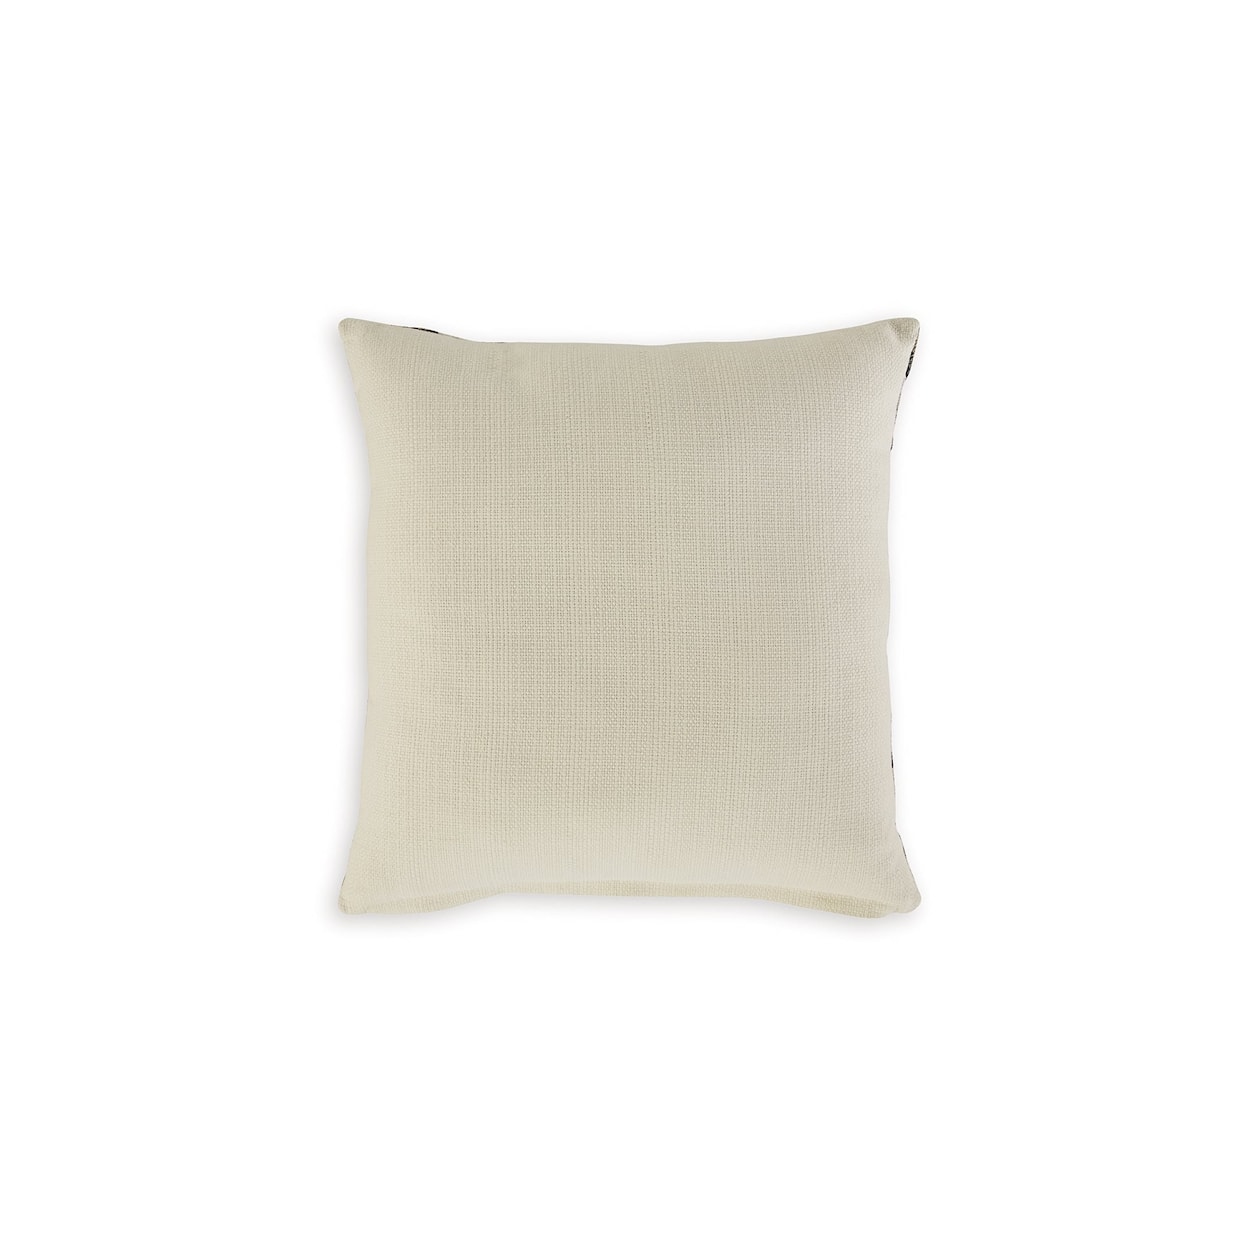 Benchcraft Holdenway Pillow (Set of 4)